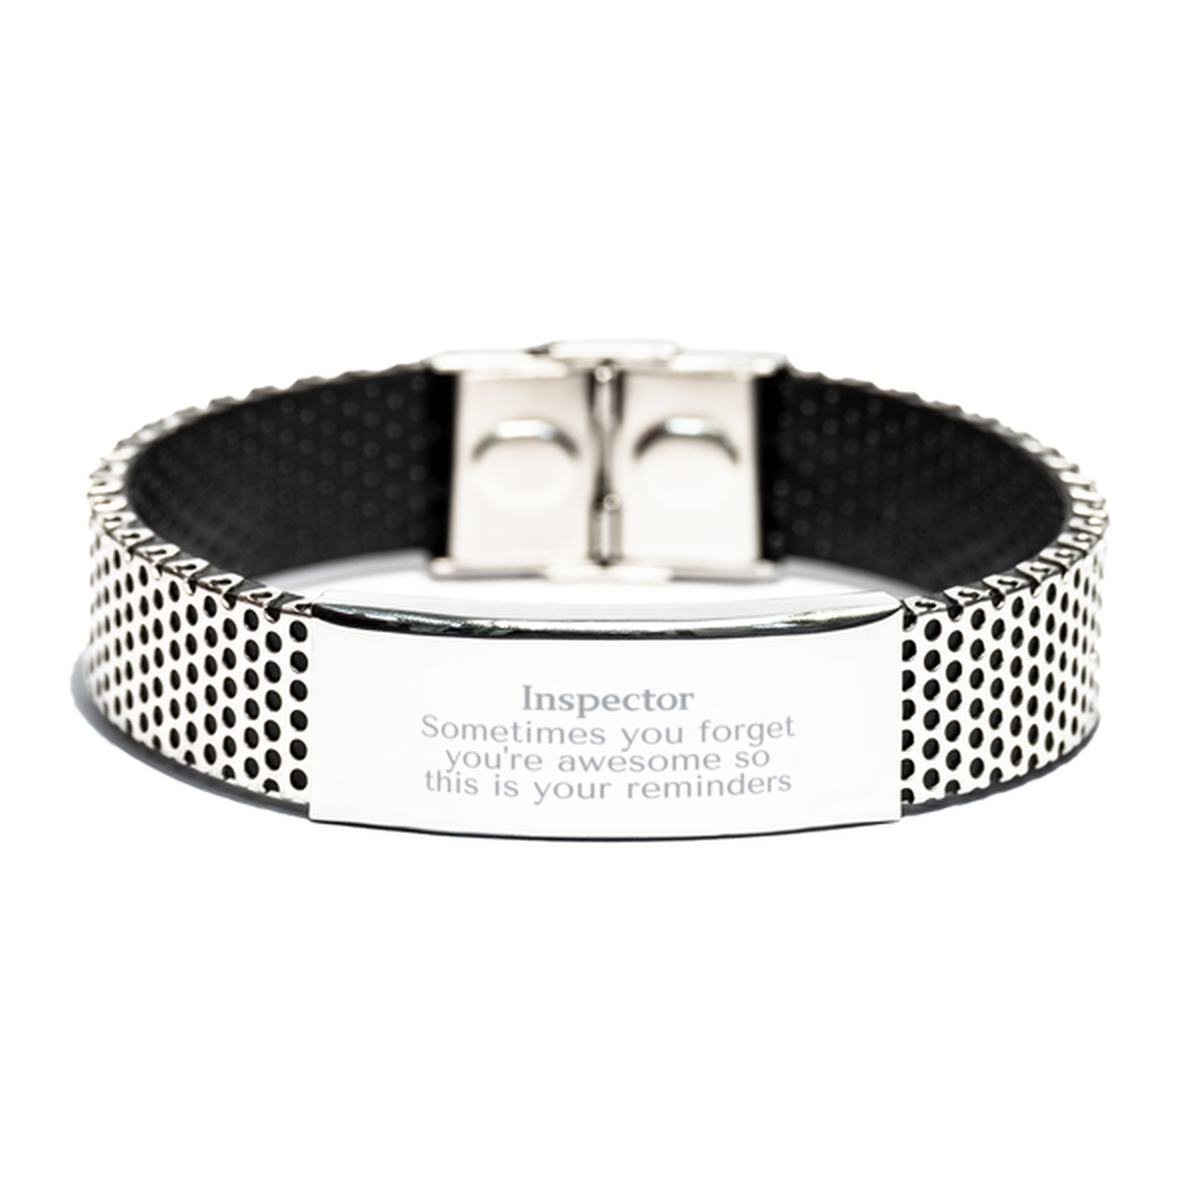 Sentimental Inspector Stainless Steel Bracelet, Inspector Sometimes you forget you're awesome so this is your reminders, Graduation Christmas Birthday Gifts for Inspector, Men, Women, Coworkers